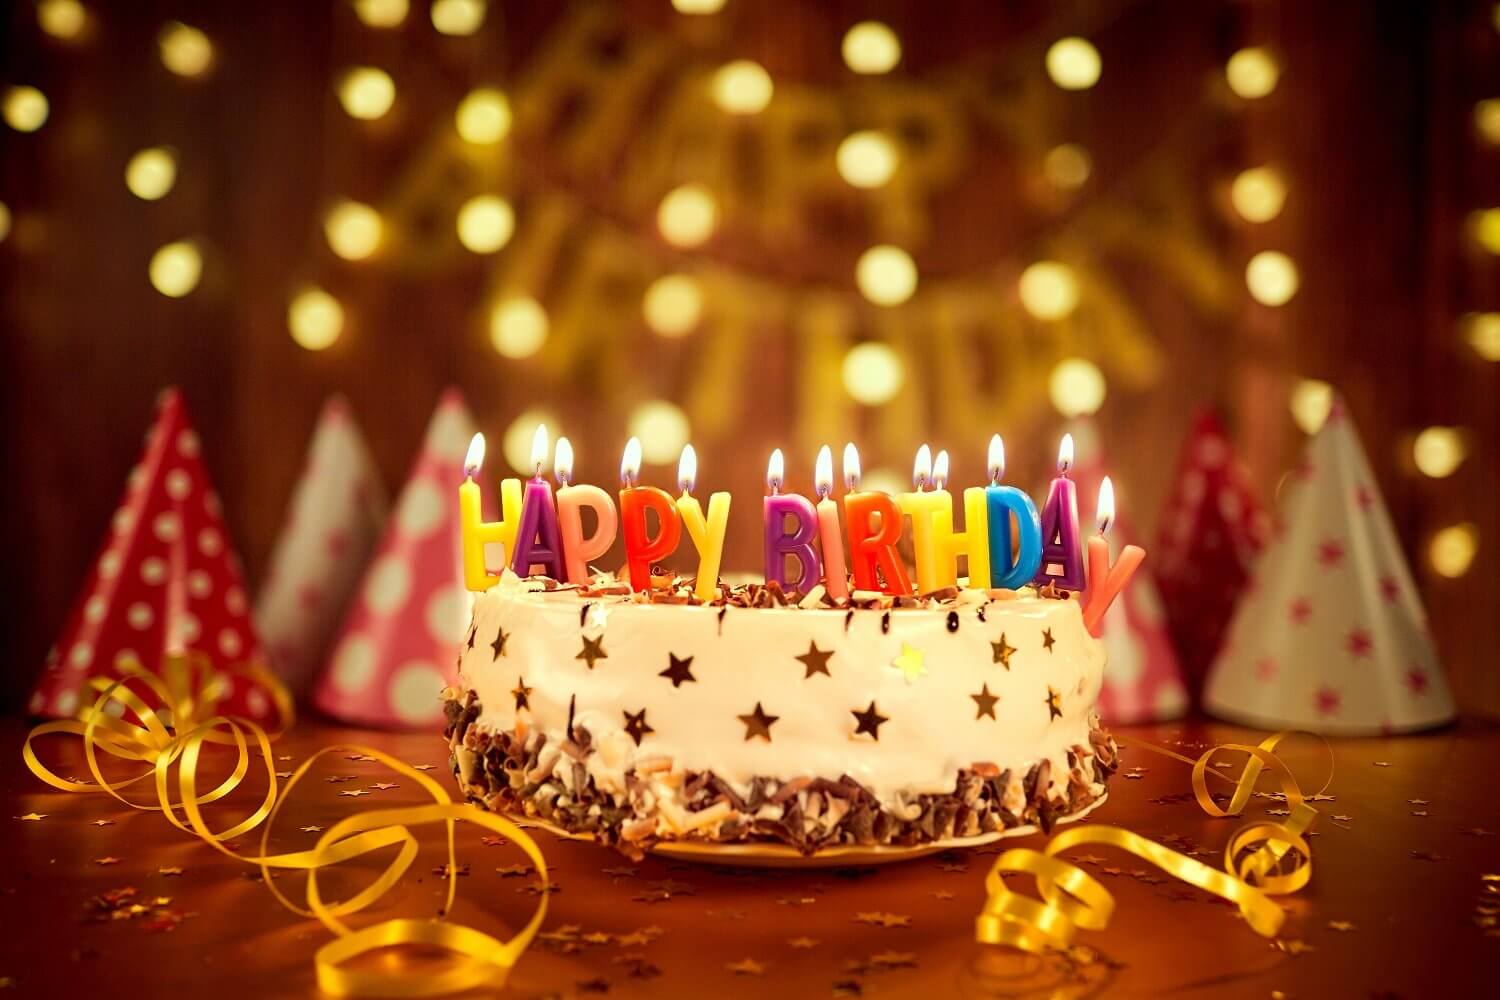 Best Happy Birthday Messages for Friends